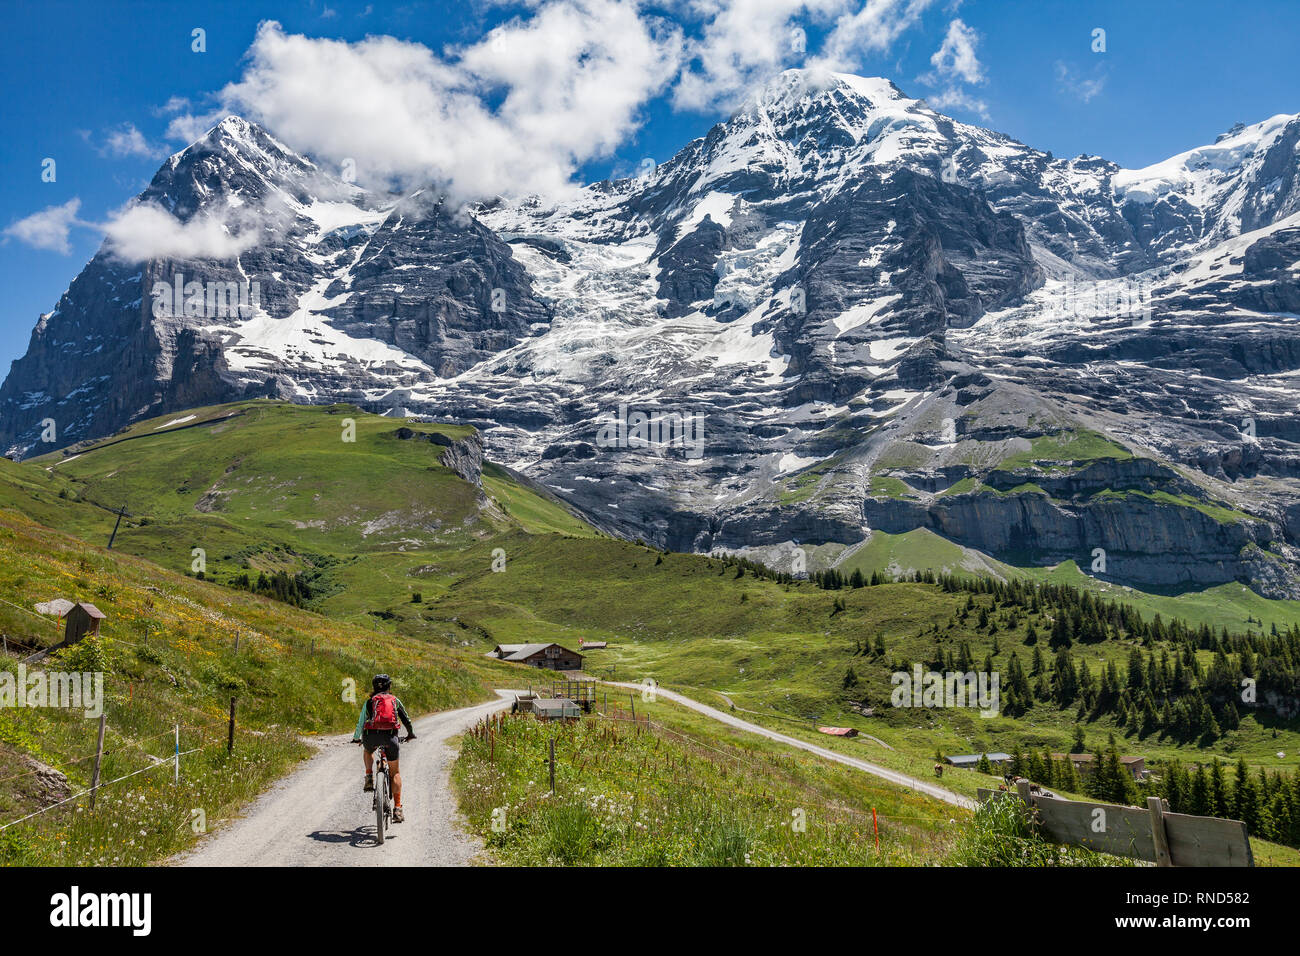 nice and ever young senior woman riding her e-mountainbike below the Eiger northface, Jungfrauregion, Switzerland Stock Photo